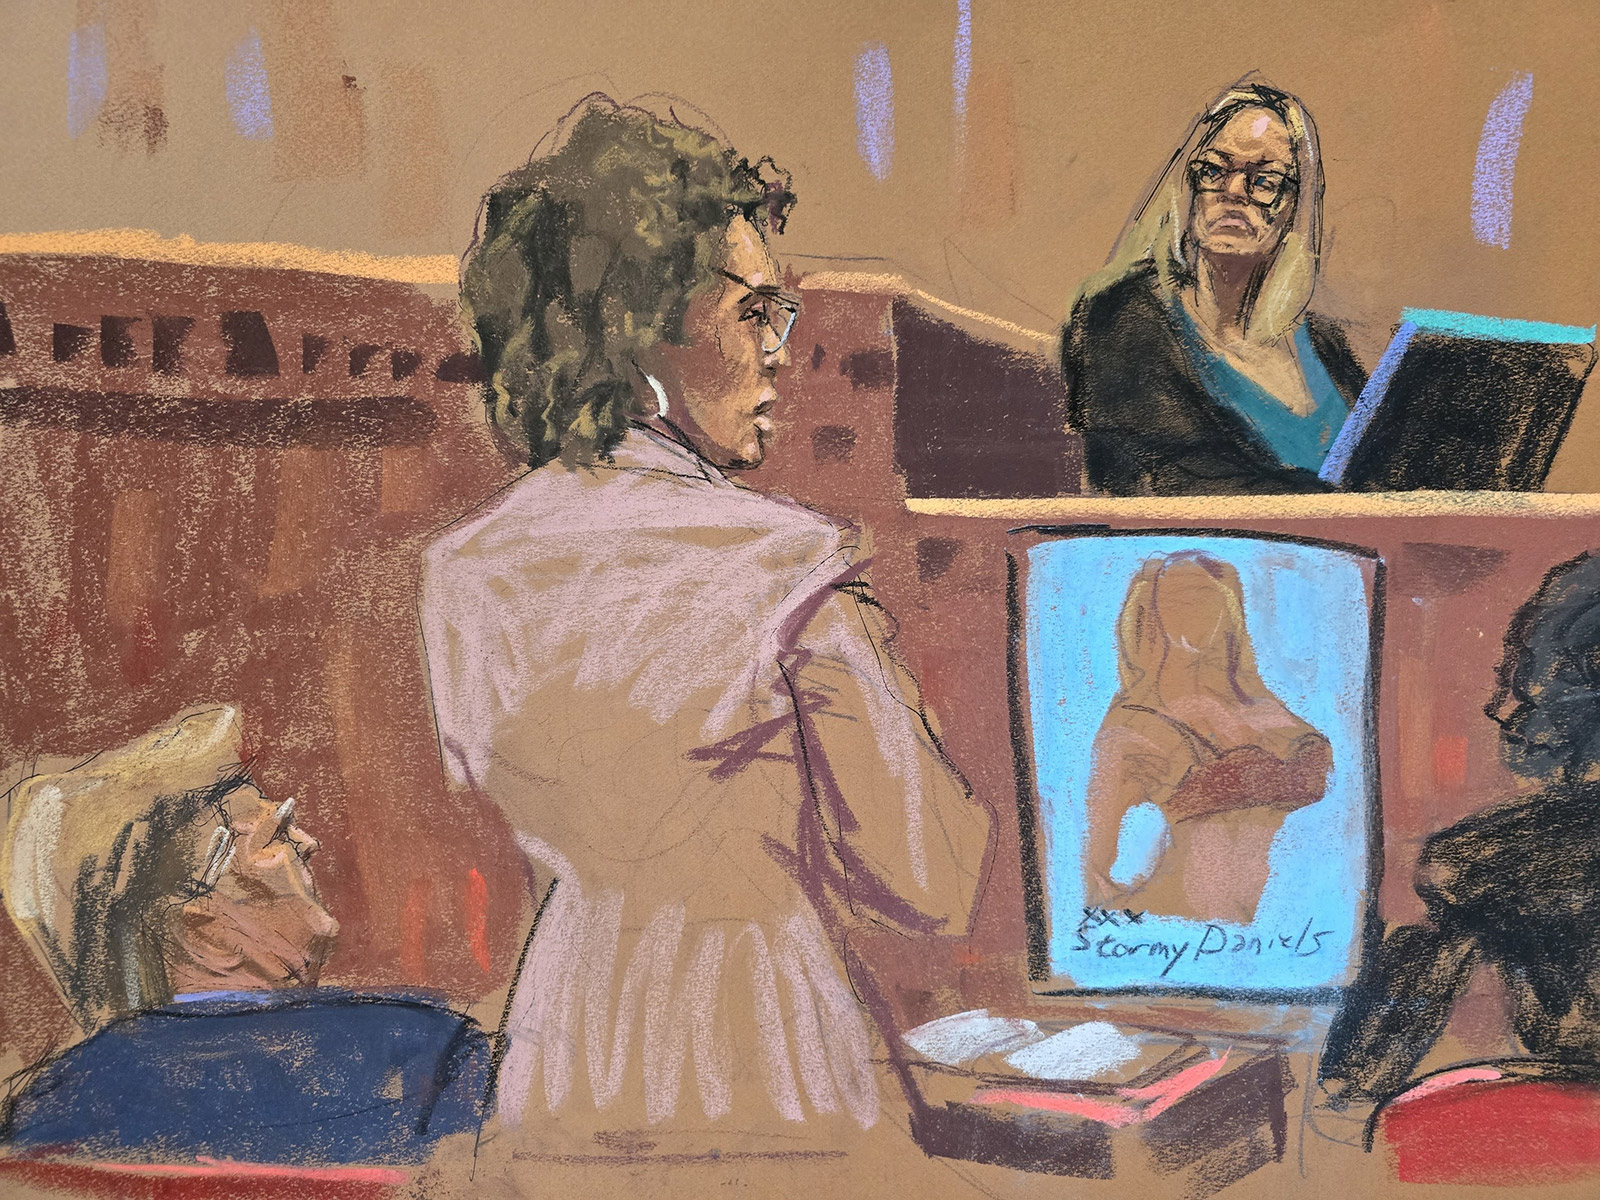 Defense attorney Susan Necheles cross-examines adult film actress Stormy Daniels during the trial on May 9.